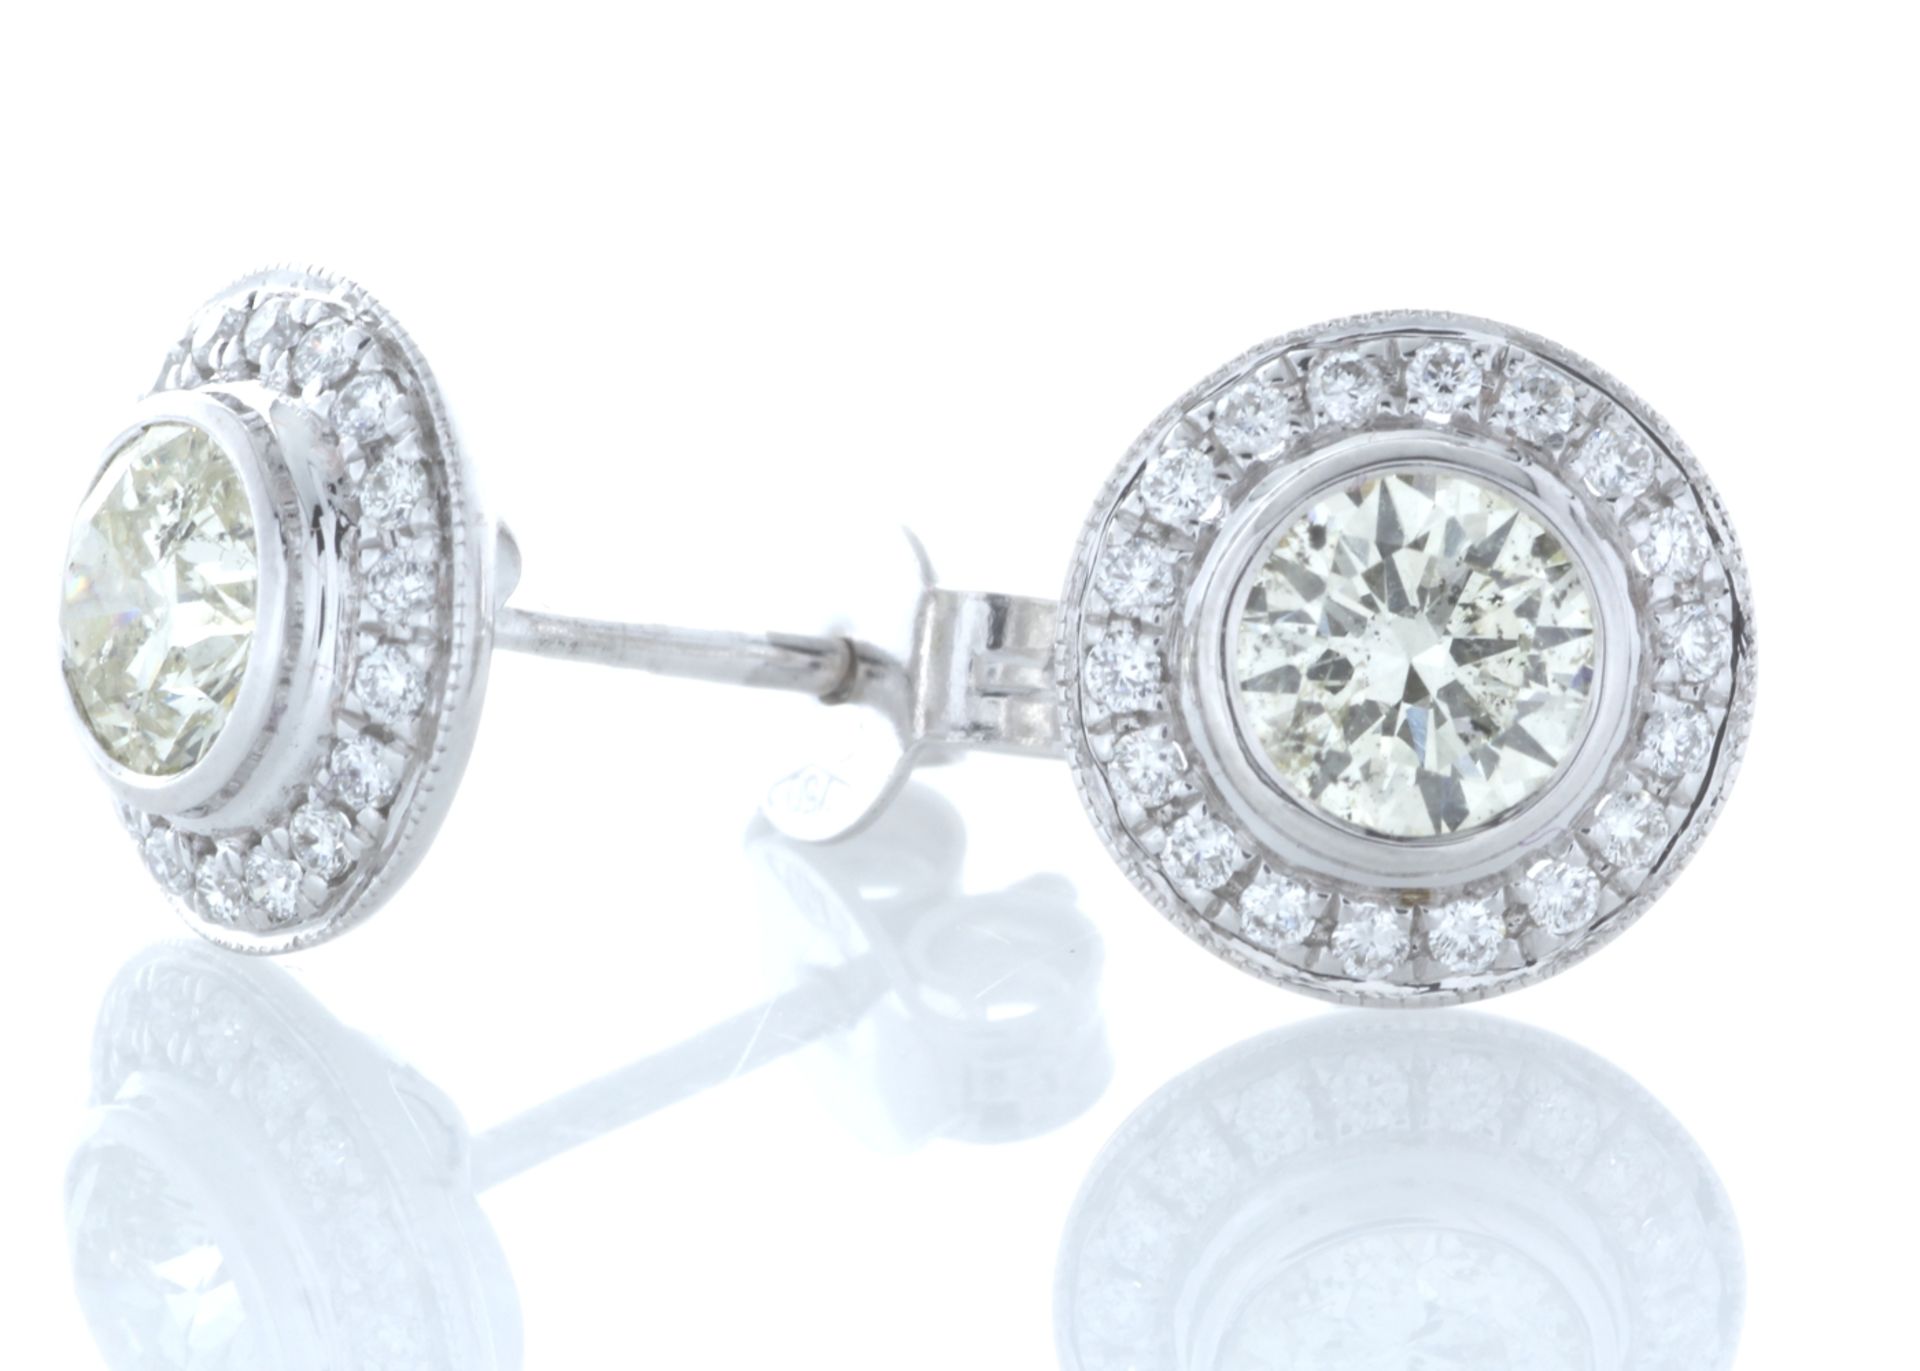 18ct White Gold Single Stone With Halo Setting Earring (1.01) 1.20 Carats - Valued by IDI £9,000. - Image 2 of 4